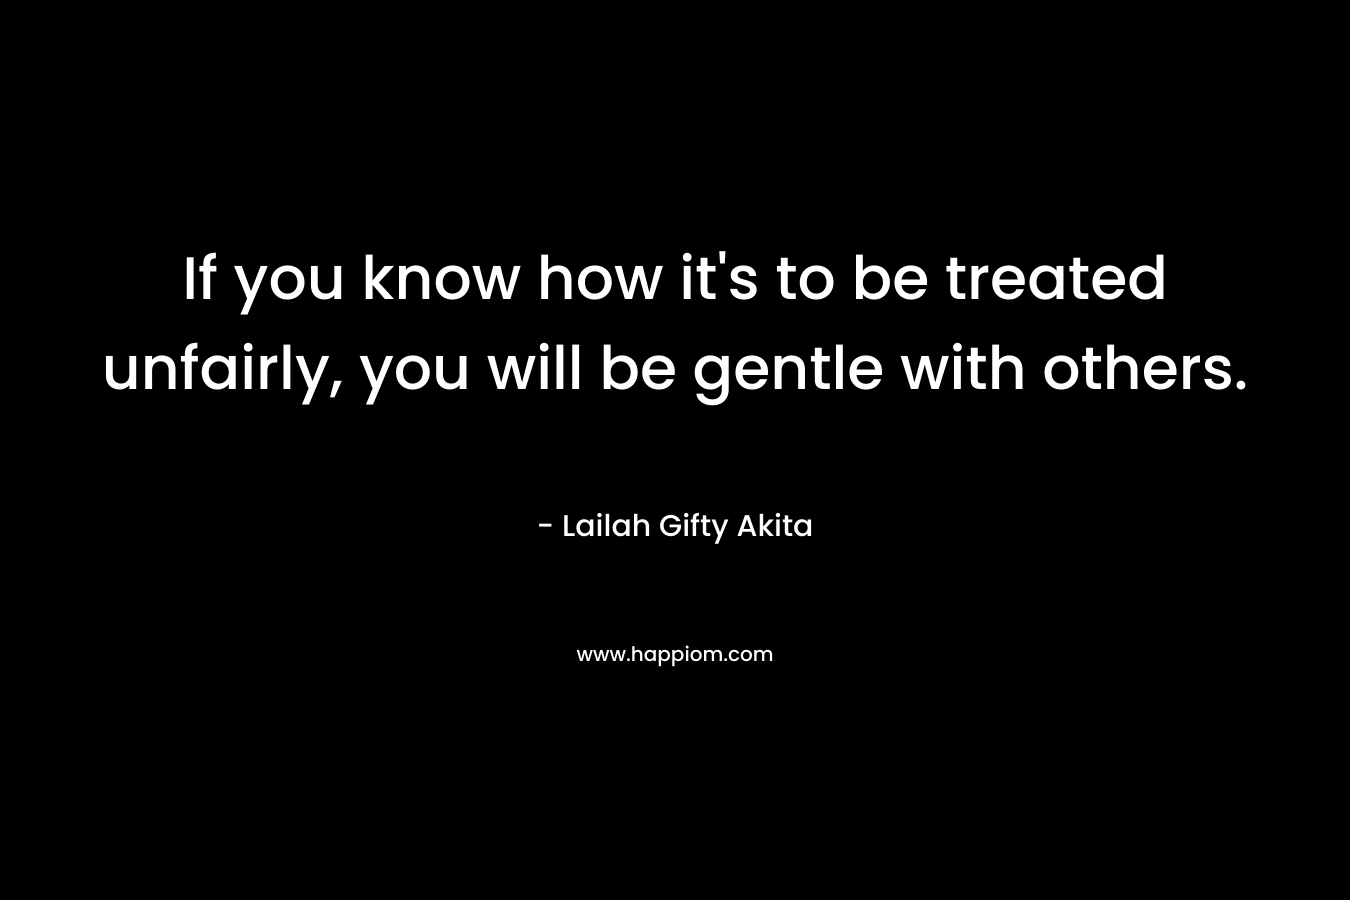 If you know how it's to be treated unfairly, you will be gentle with others.